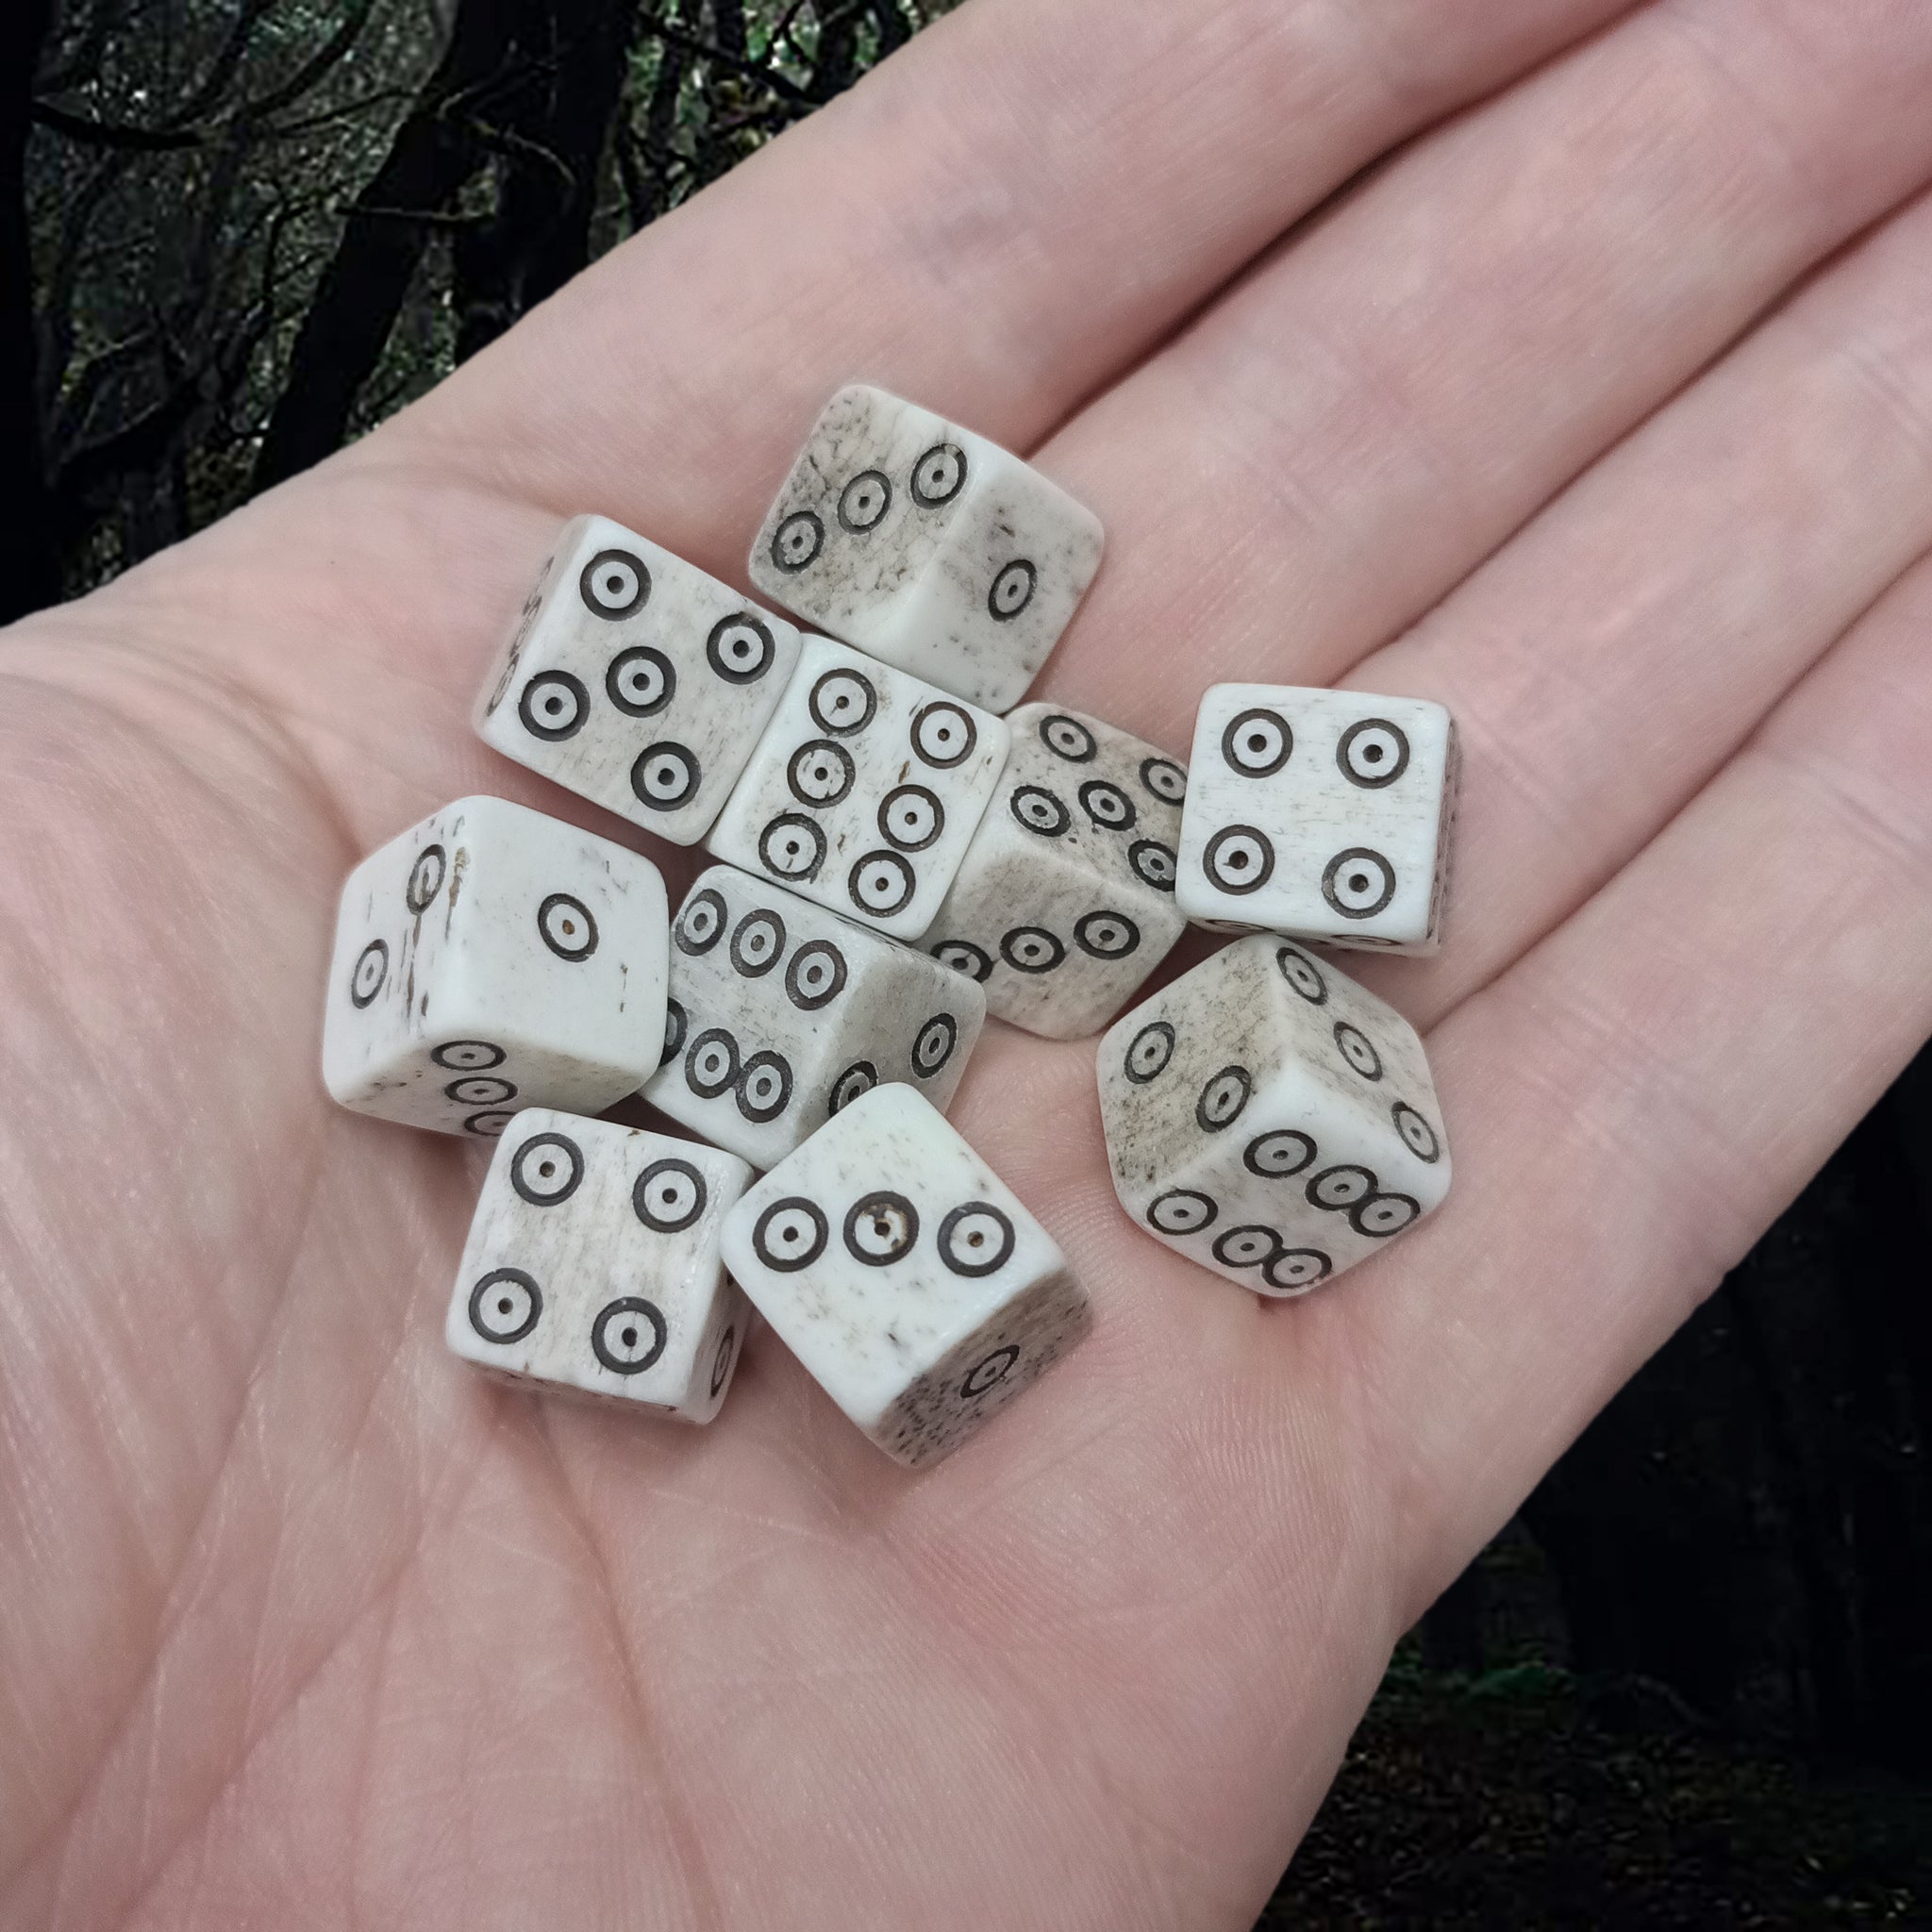 Cow Bone Replica Medium Dice with Hand-Carved Dot & Ring Spots on Hand x 10